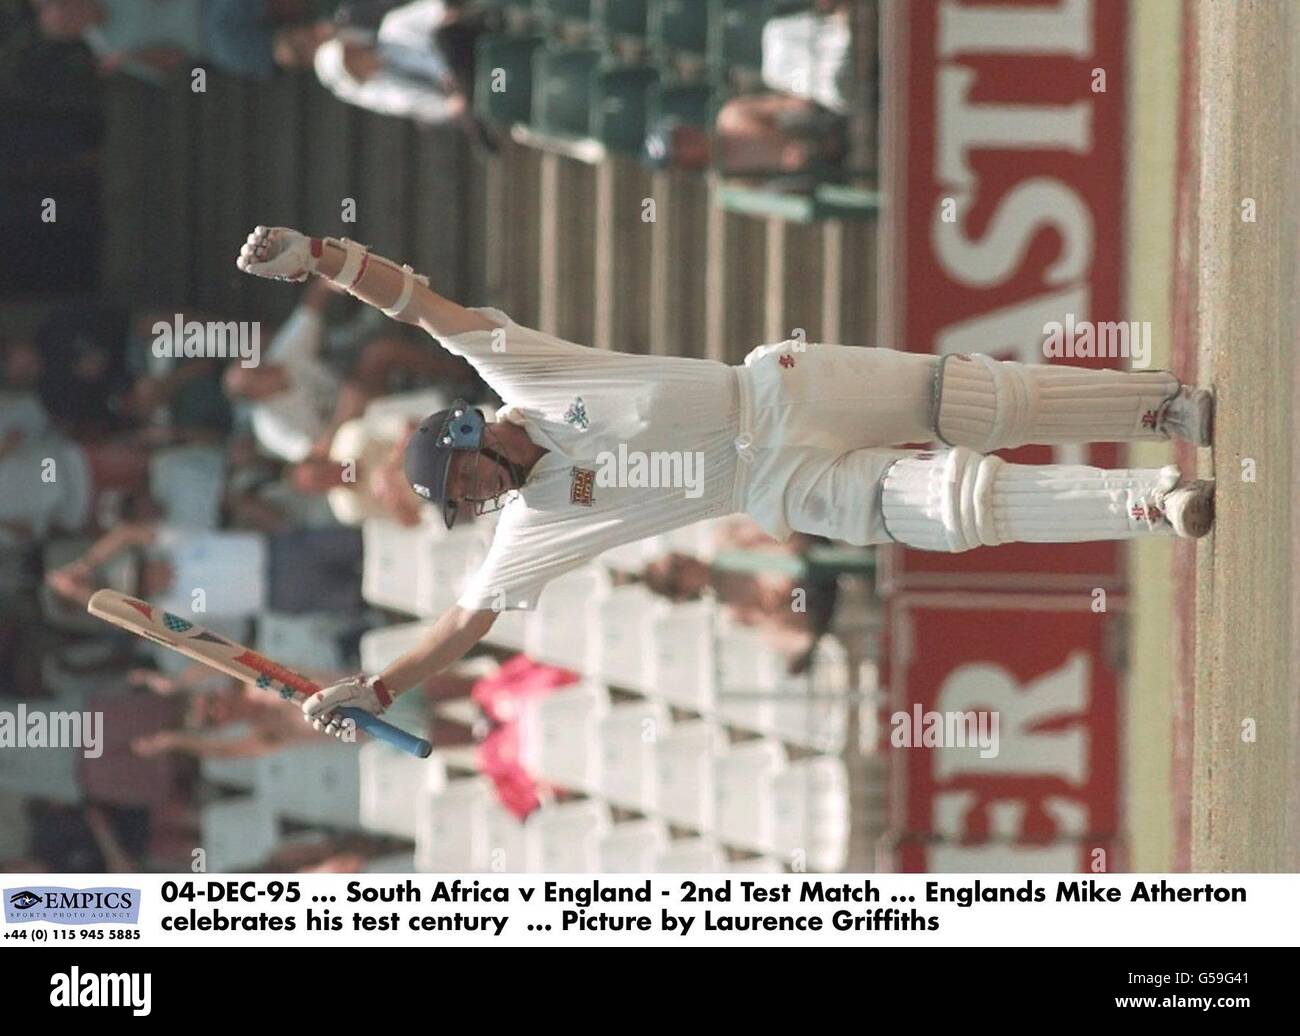 04-DEC-95, South Africa v England - 2nd Test Match, Englands Mike Atherton celebrates his test century, Picture by Laurence Griffiths Stock Photo